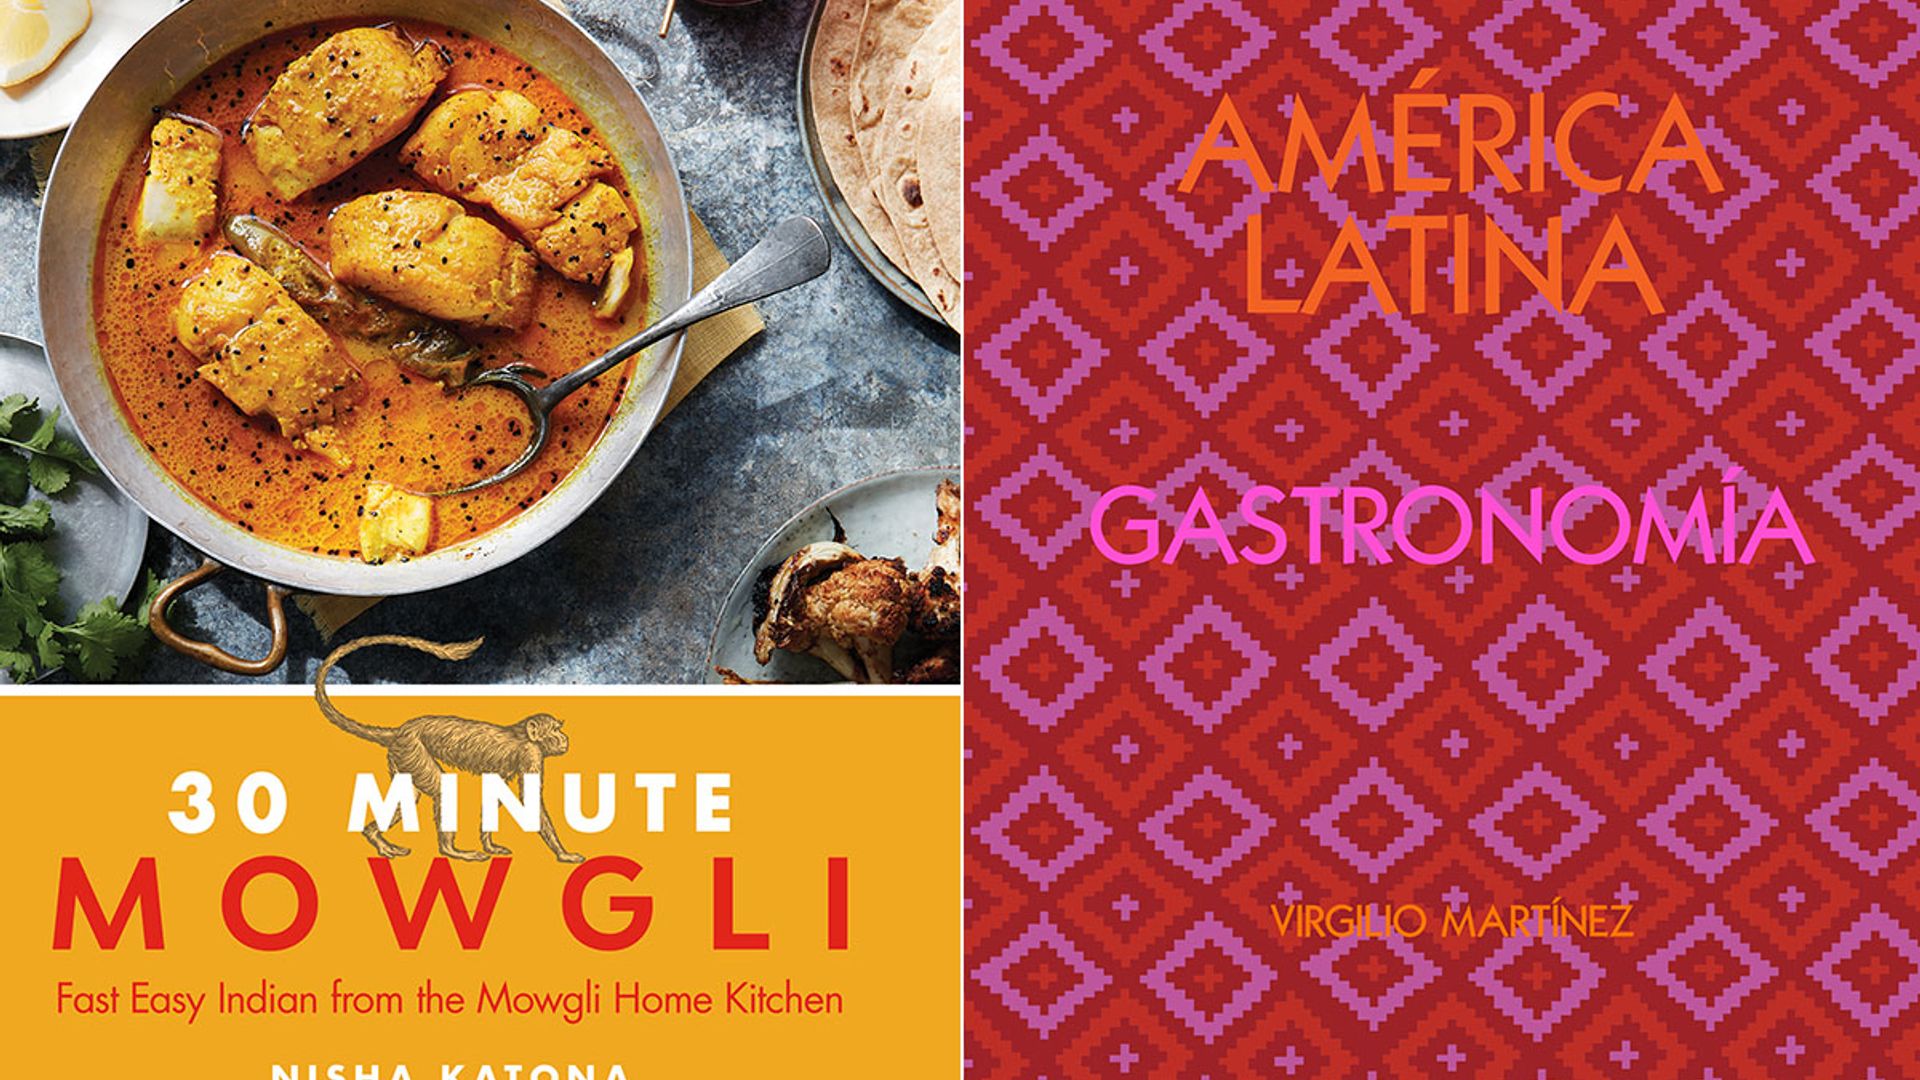 9 best cookbooks for making authentic cuisine from around the world